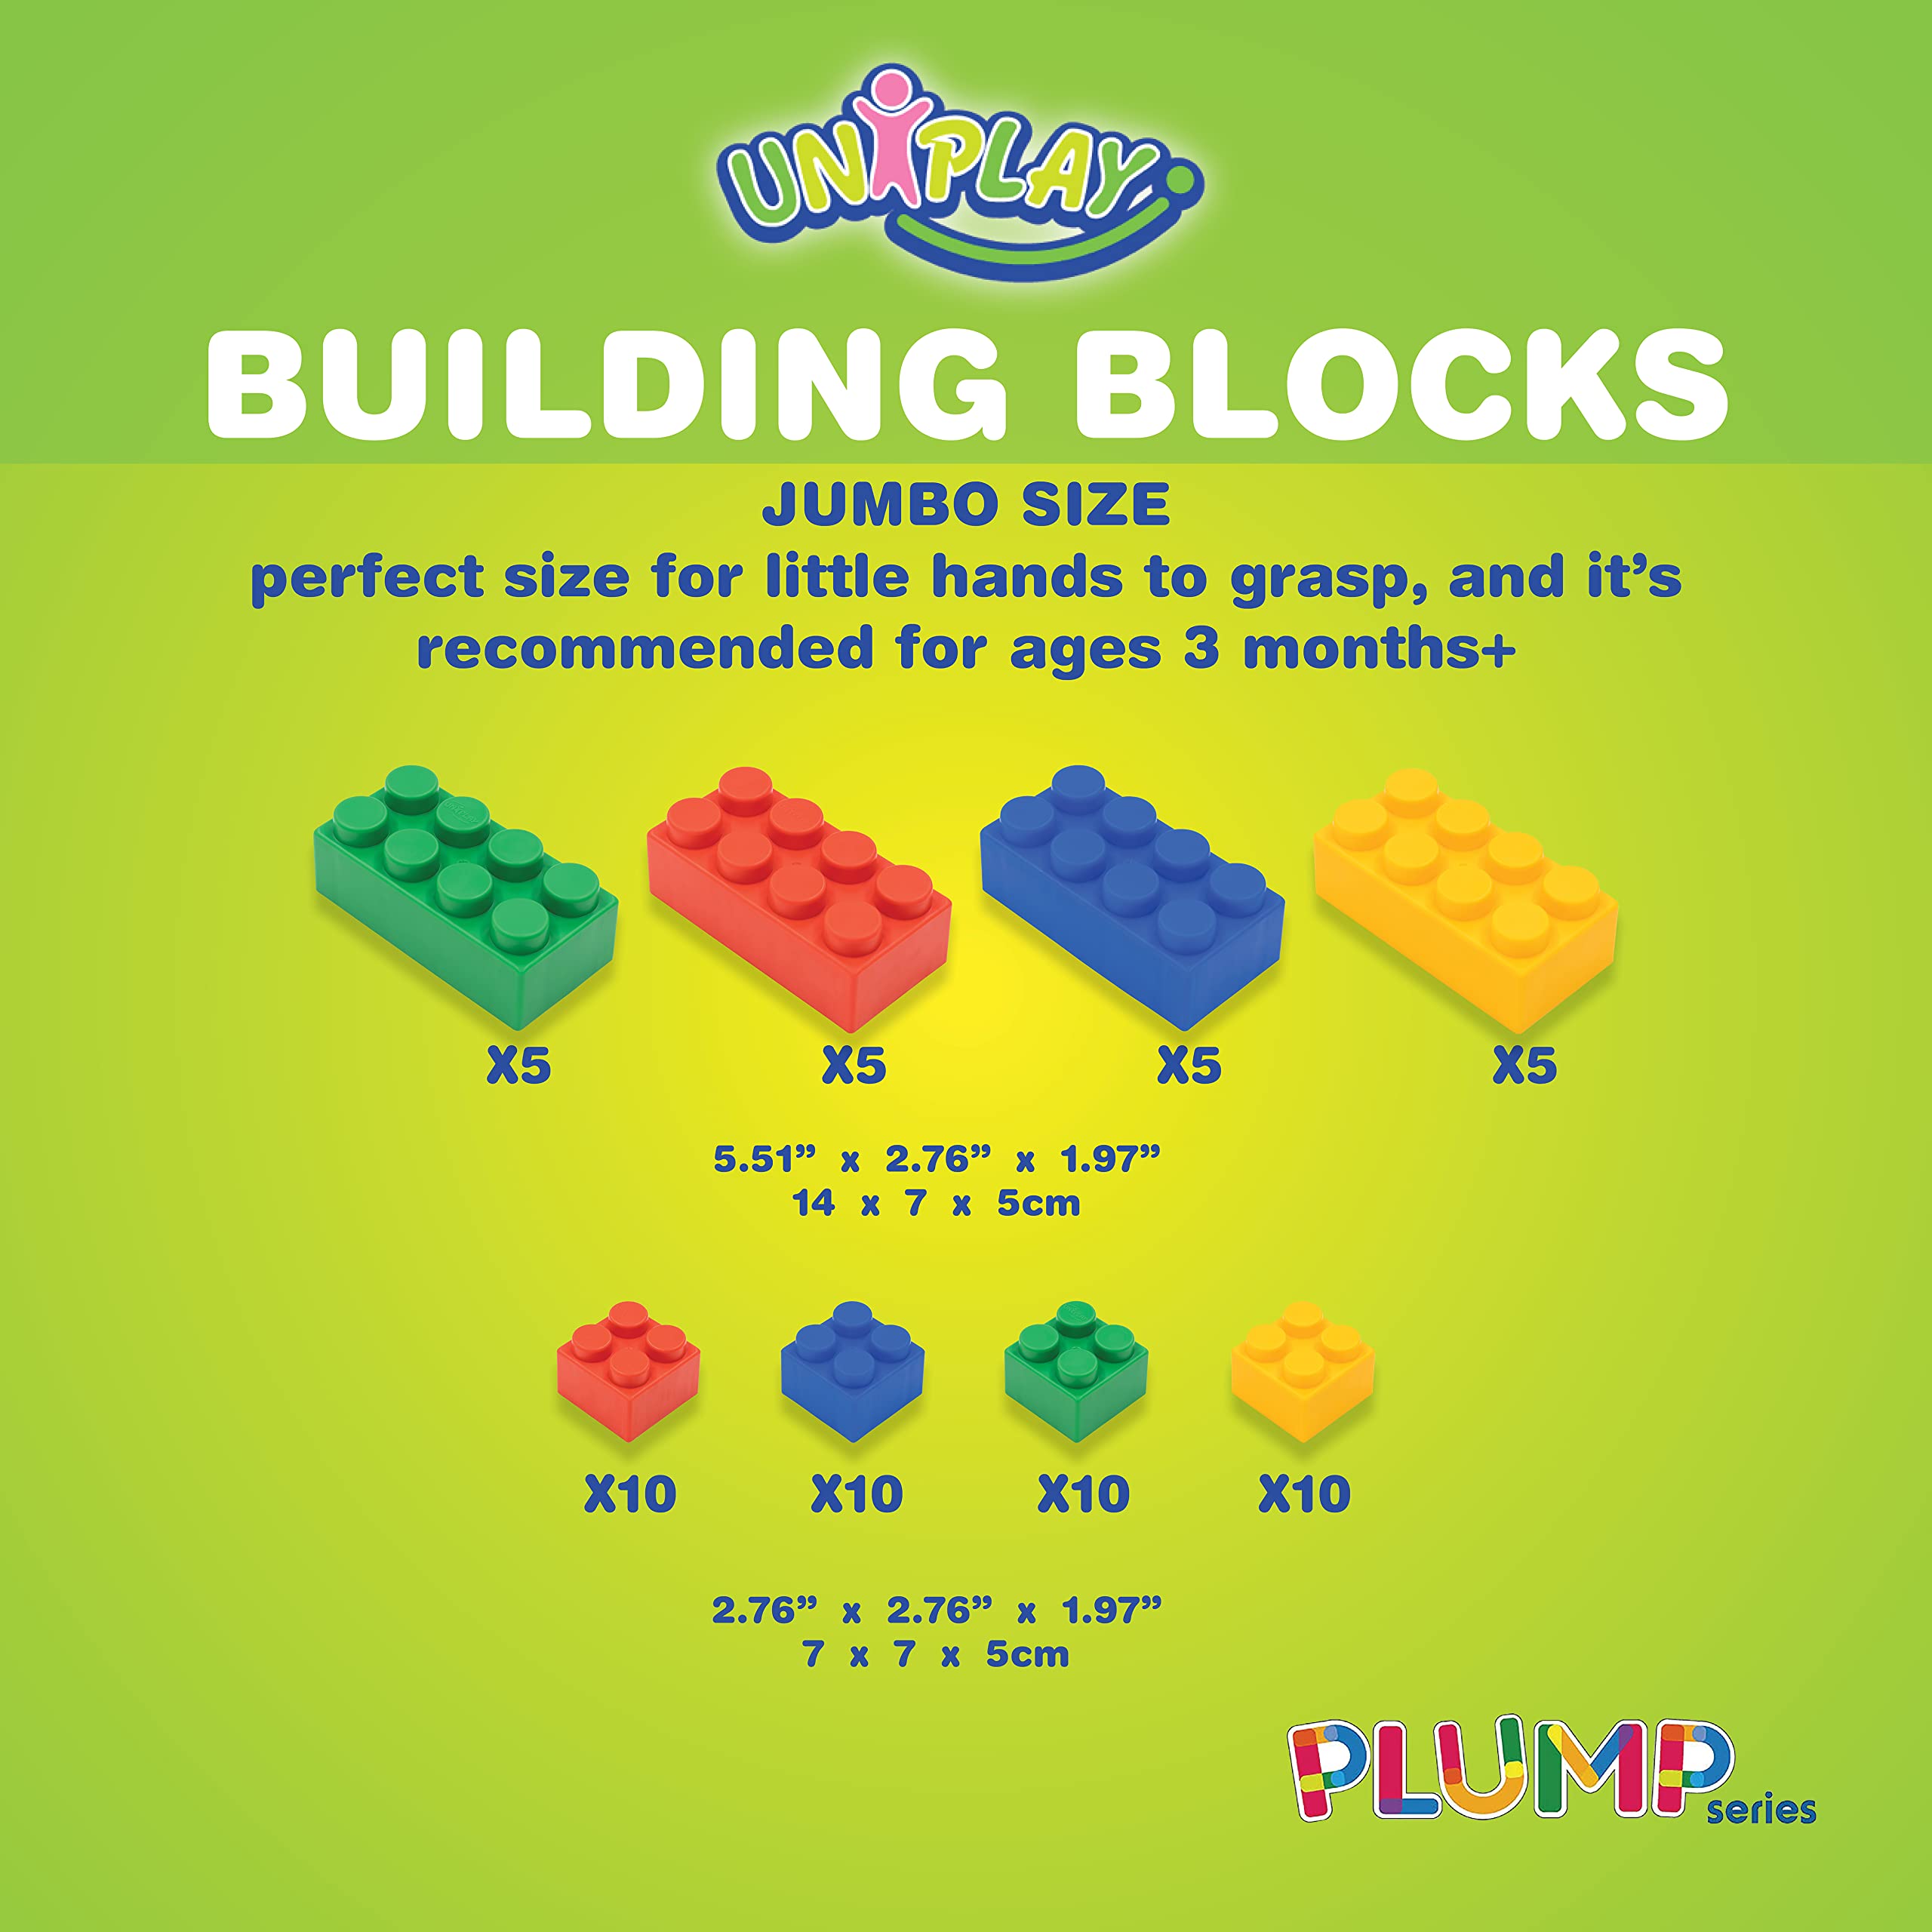 UNiPLAY Plump Soft Building Blocks — Jumbo Multicolor Stacking Blocks for Cognitive Development and Educational Games for Ages 3 Months and Up (60-Piece Set)